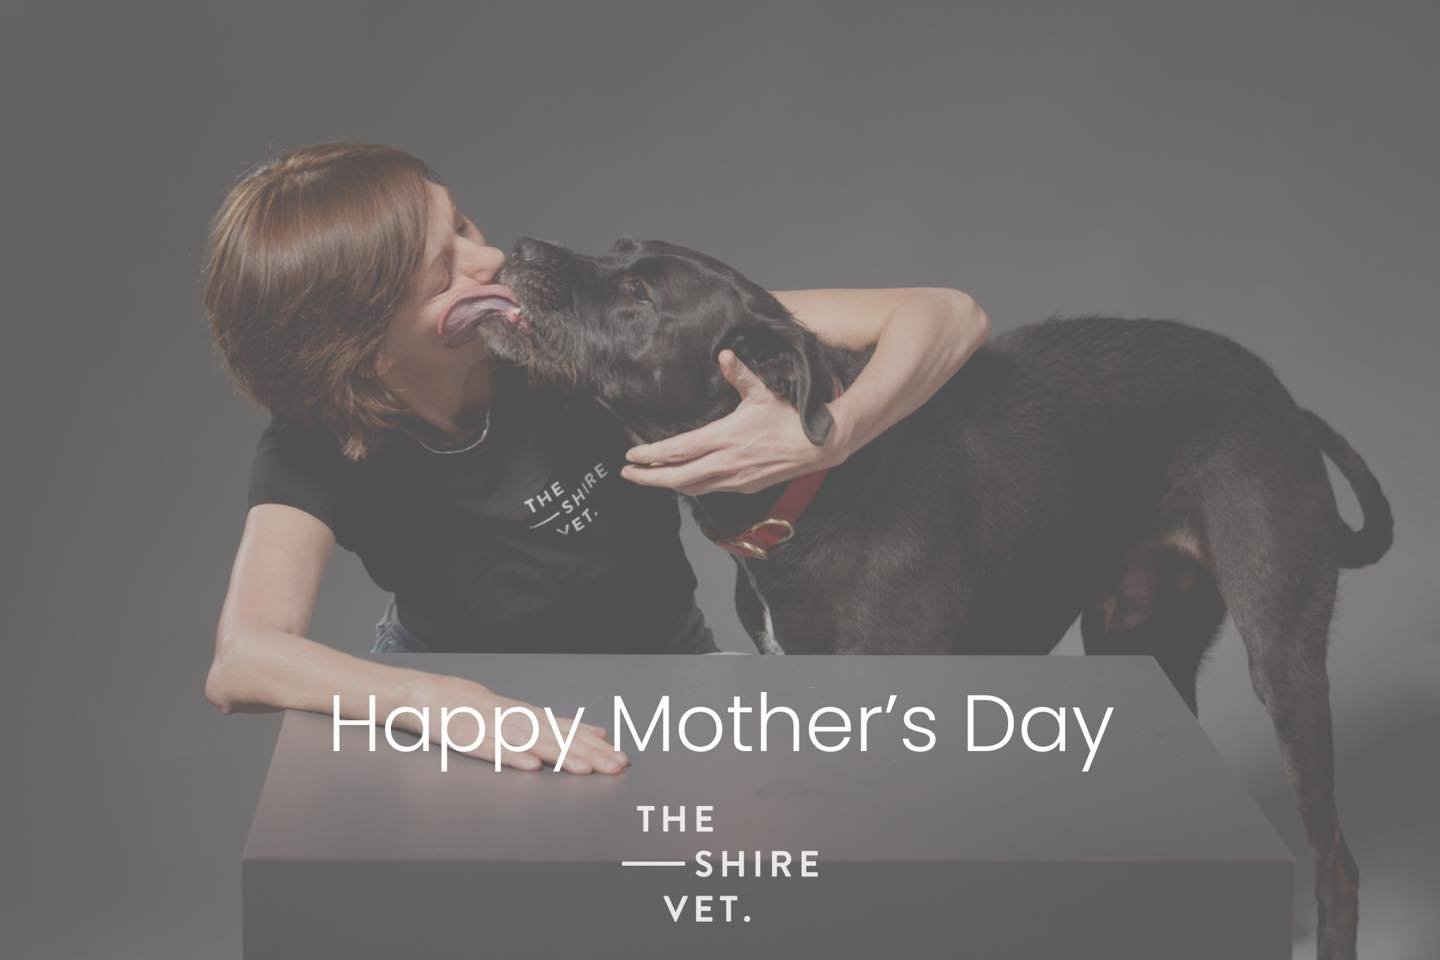 To all kinds of mums, fur mums and those who stand as mother figures, today, we celebrate you!  Your love, strength and endless support makes the world a better place 💐 

Happy Mother's Day from our team at The Shire Vet. We hope your furbabies give